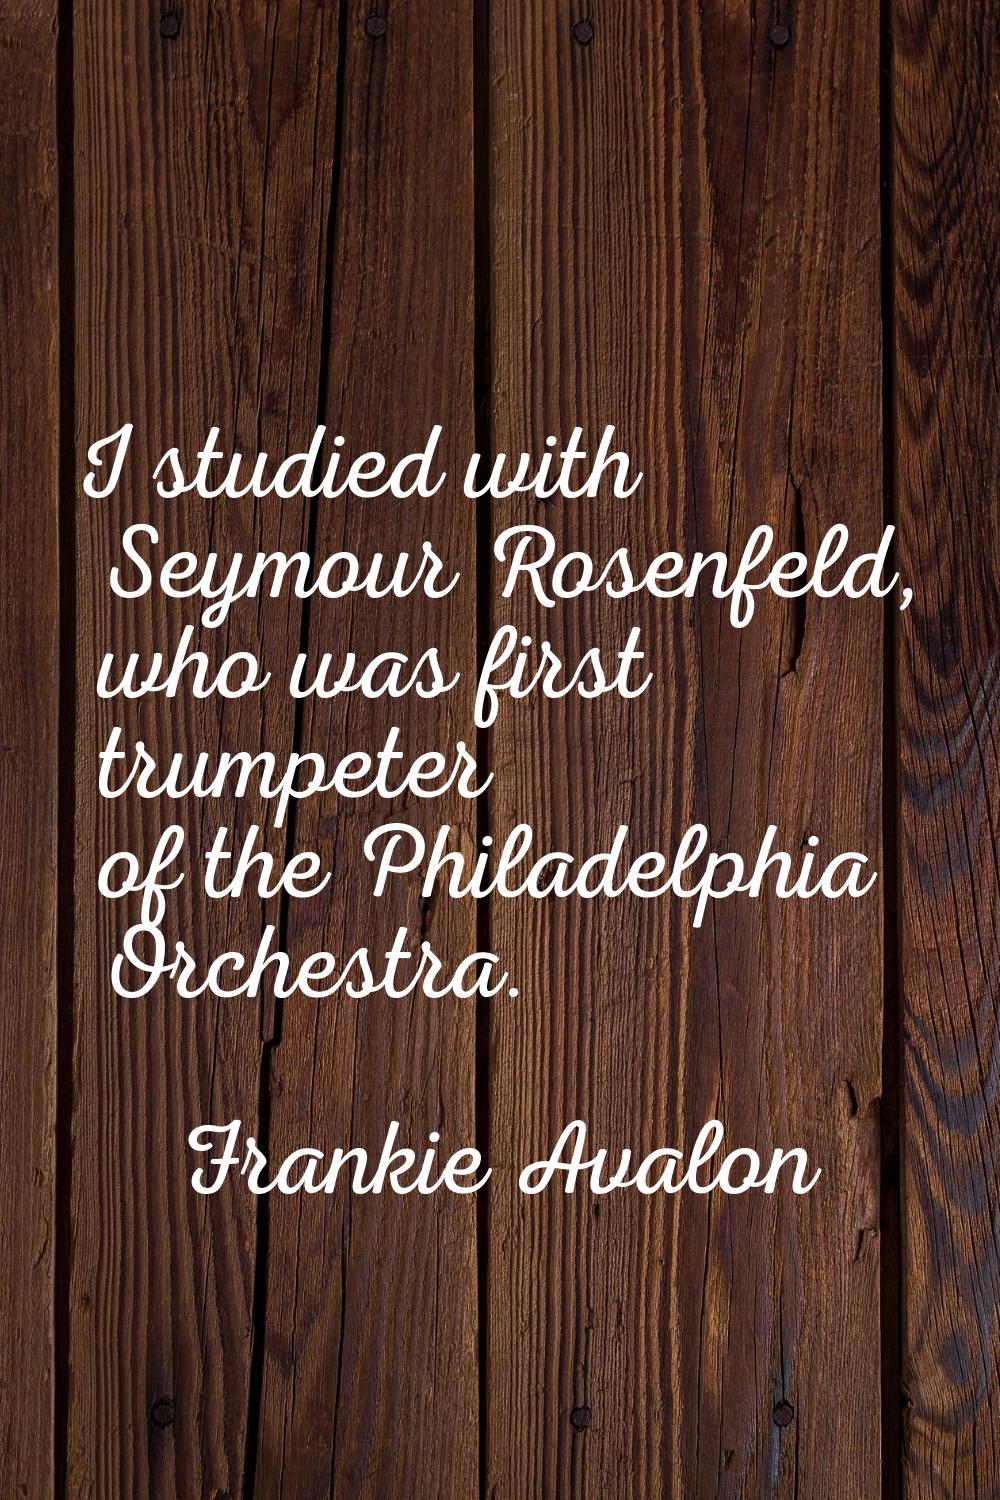 I studied with Seymour Rosenfeld, who was first trumpeter of the Philadelphia Orchestra.